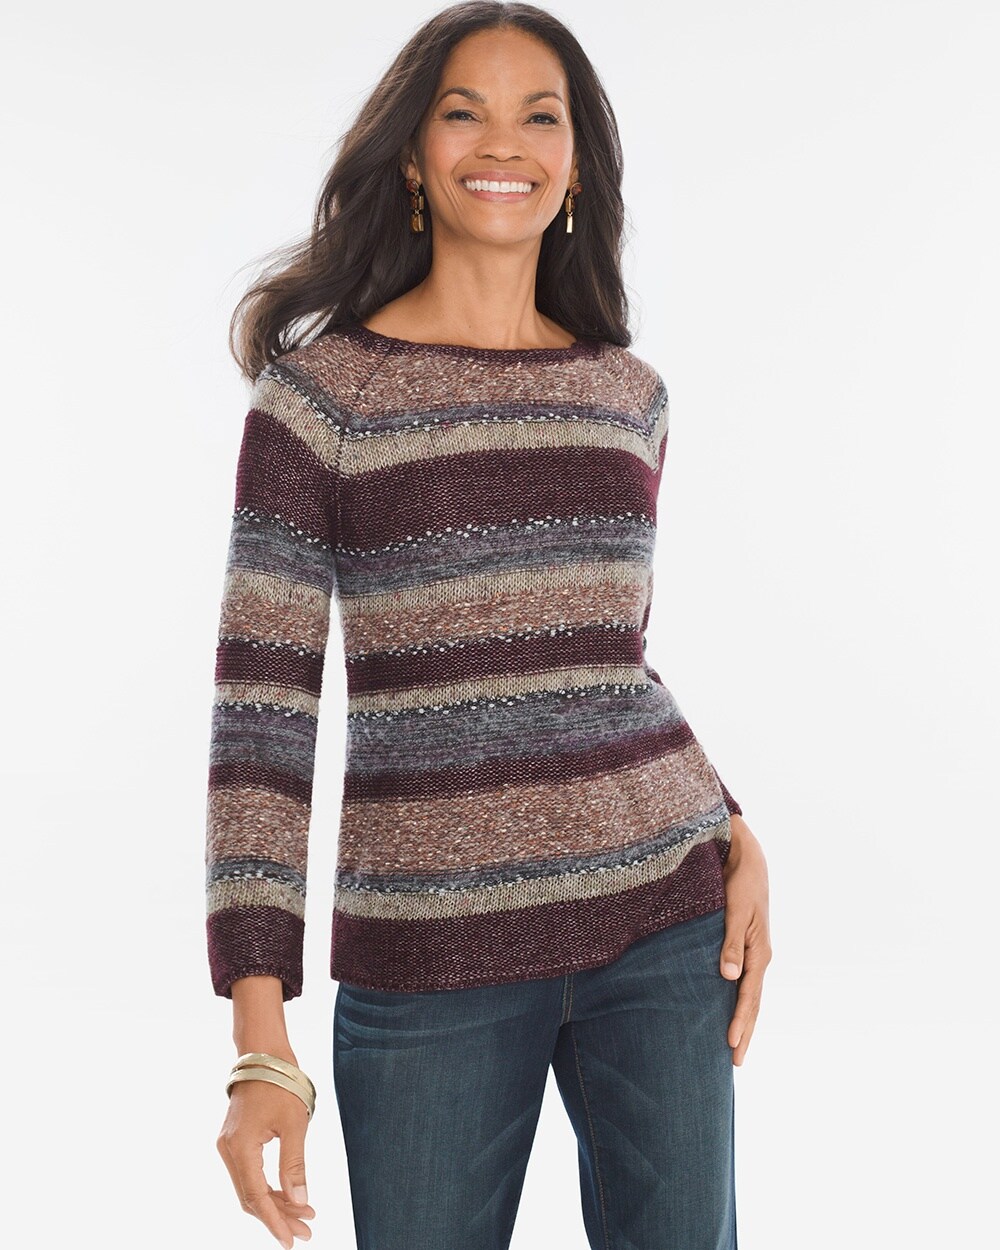 Mixed Stripe Pullover